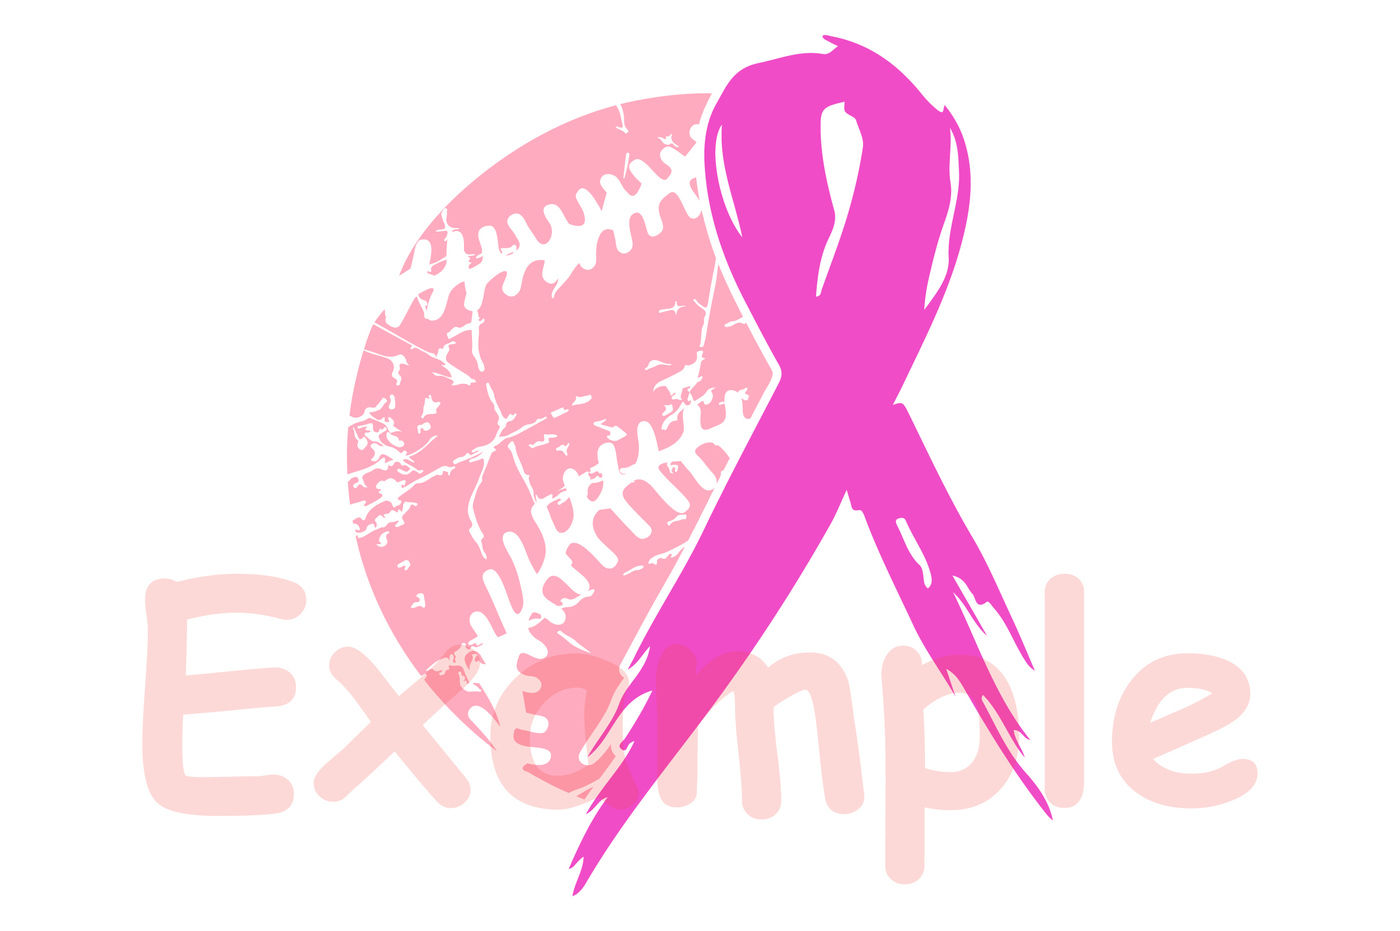 Real Timberwolves Wear Pink - Breast Cancer Awareness -- SVG, PNG, JPG  Digital Download - No Physical Product Will Be Sent